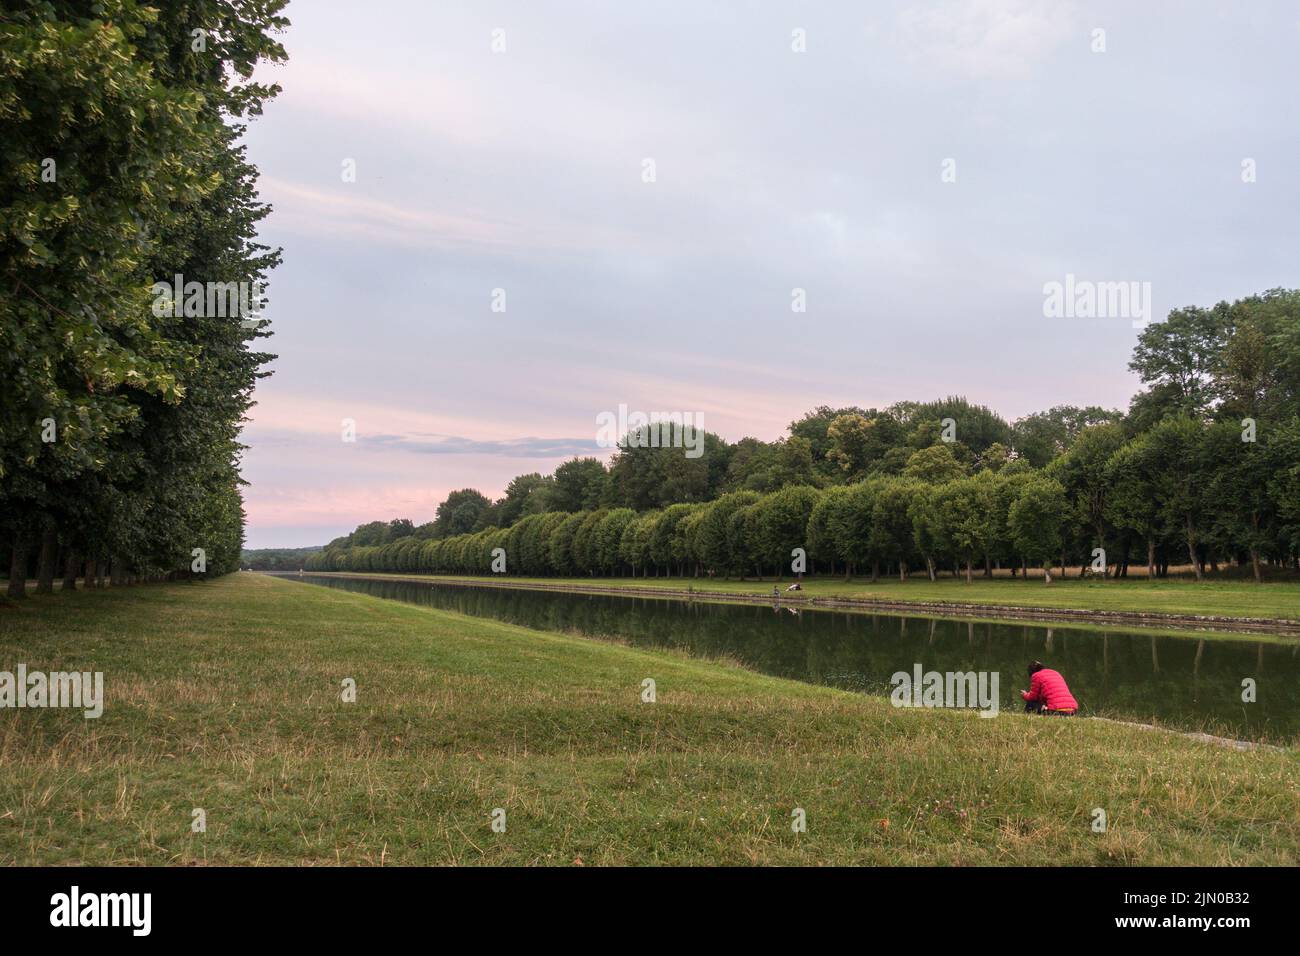 The Grand Canal in the gardens of the Chateau de Fontainebleau, France. Stock Photo